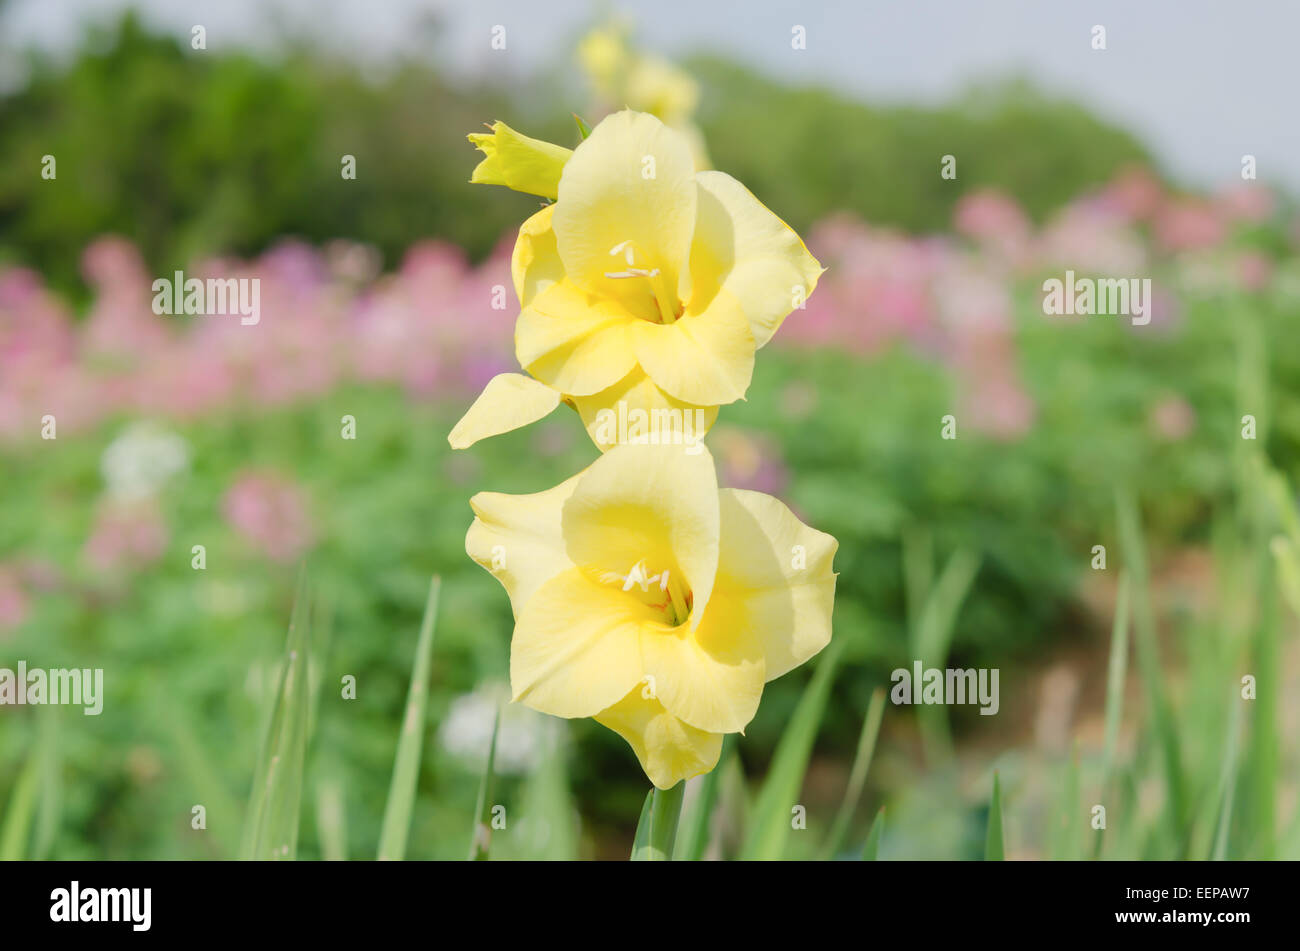 Gladiolus or sword lily a genus of perennial bulbous flowering plants in the iris family (Iridaceae) Stock Photo